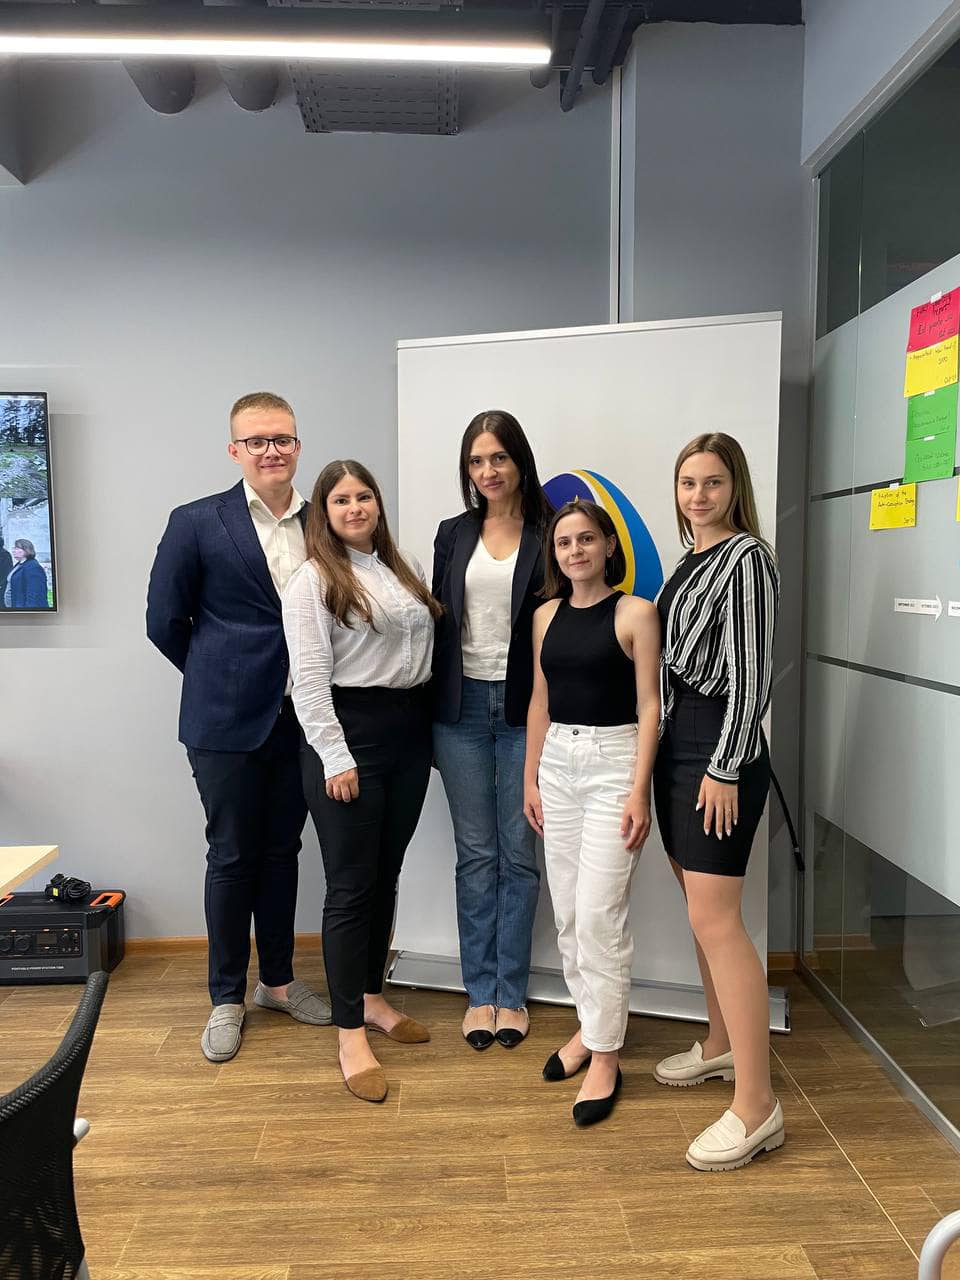 Law students completed an internship at the EUACI